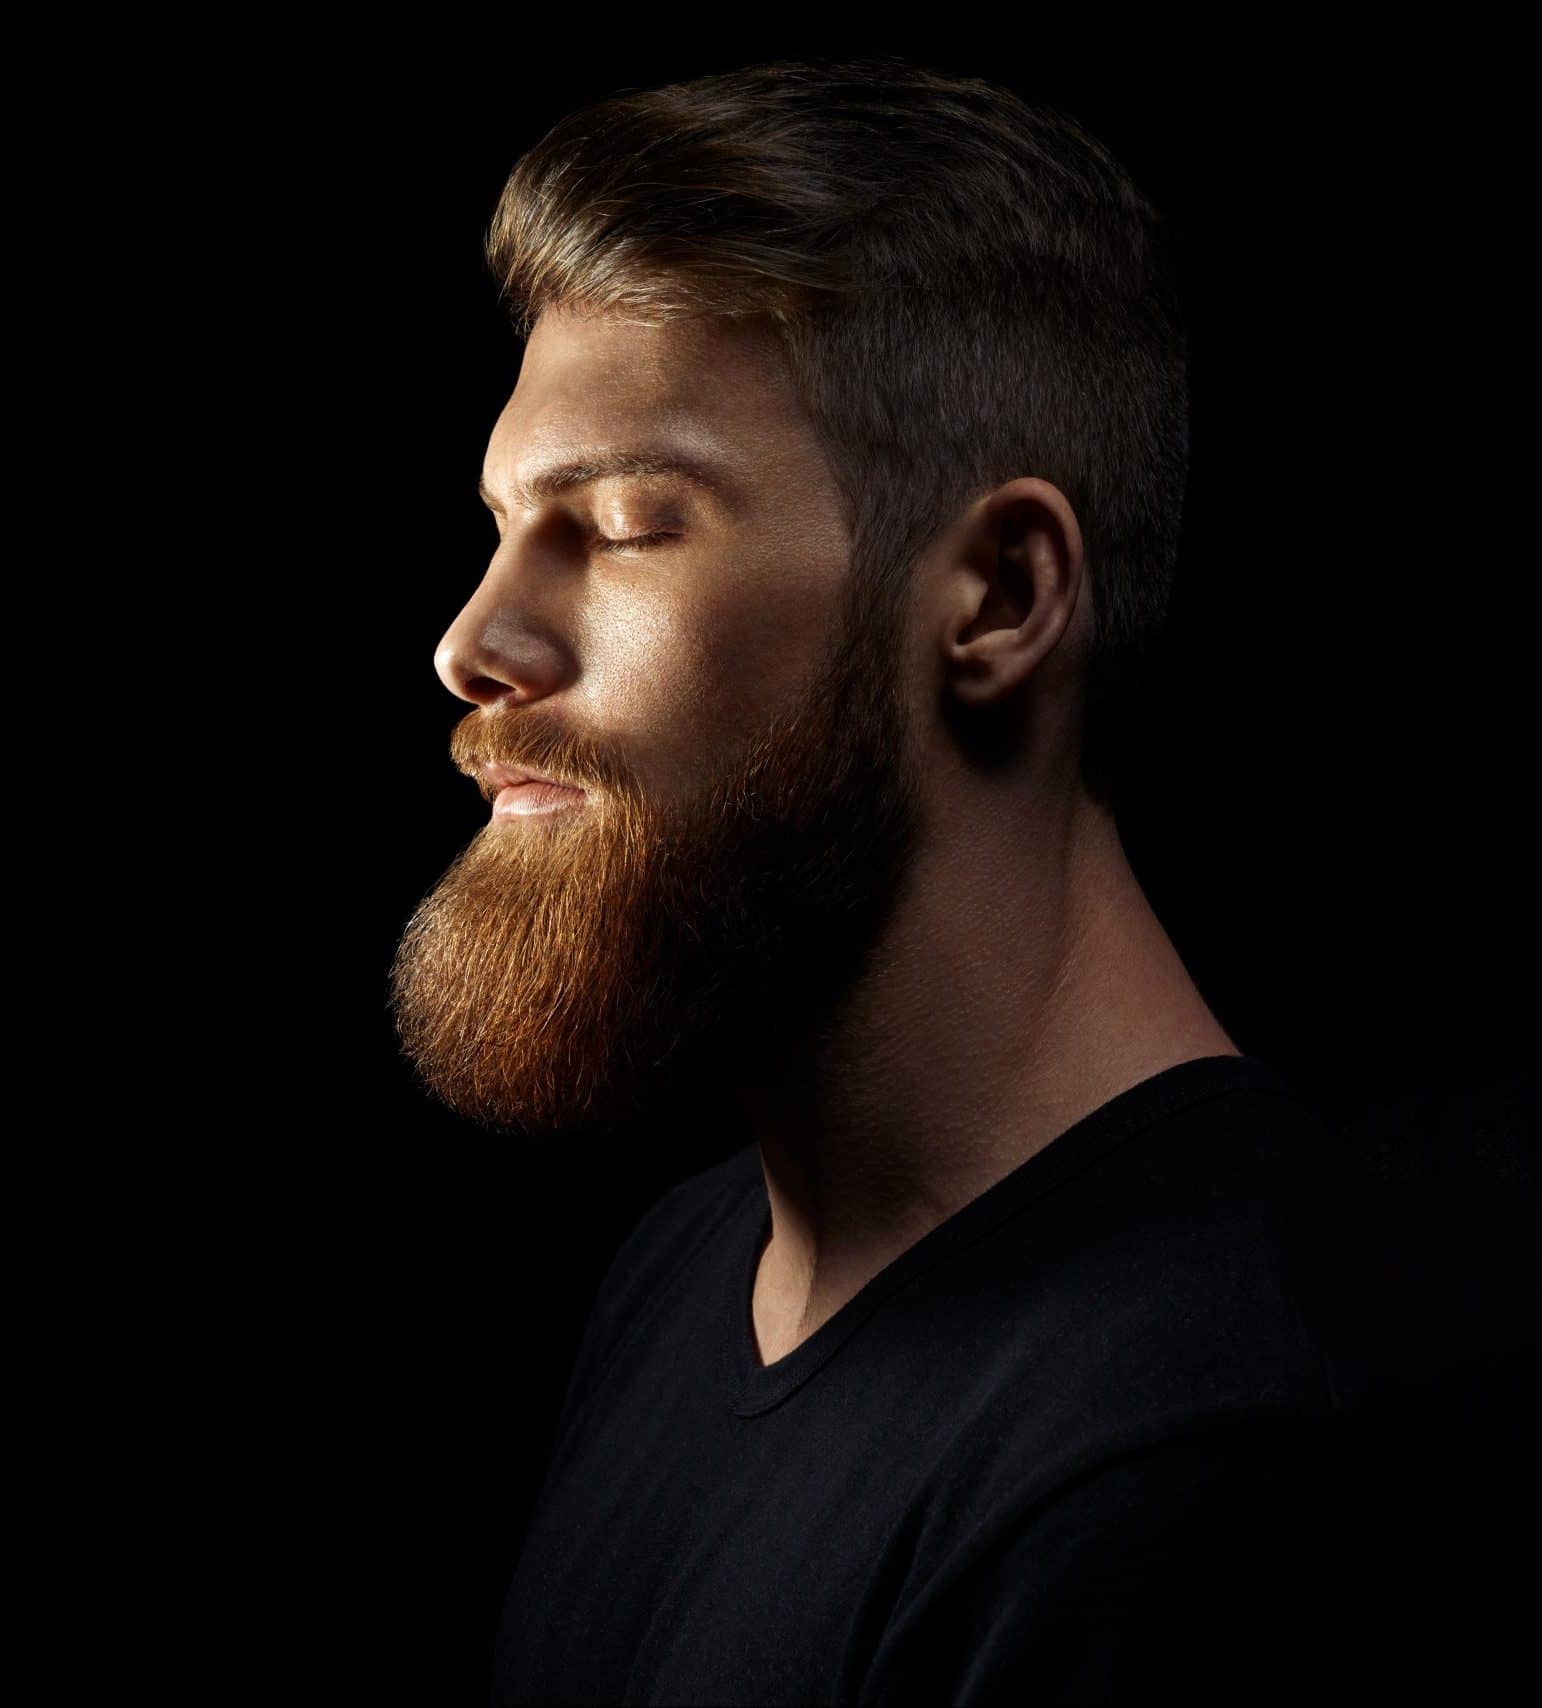 All black background captures well groomed man with beard with eyes closed, calm